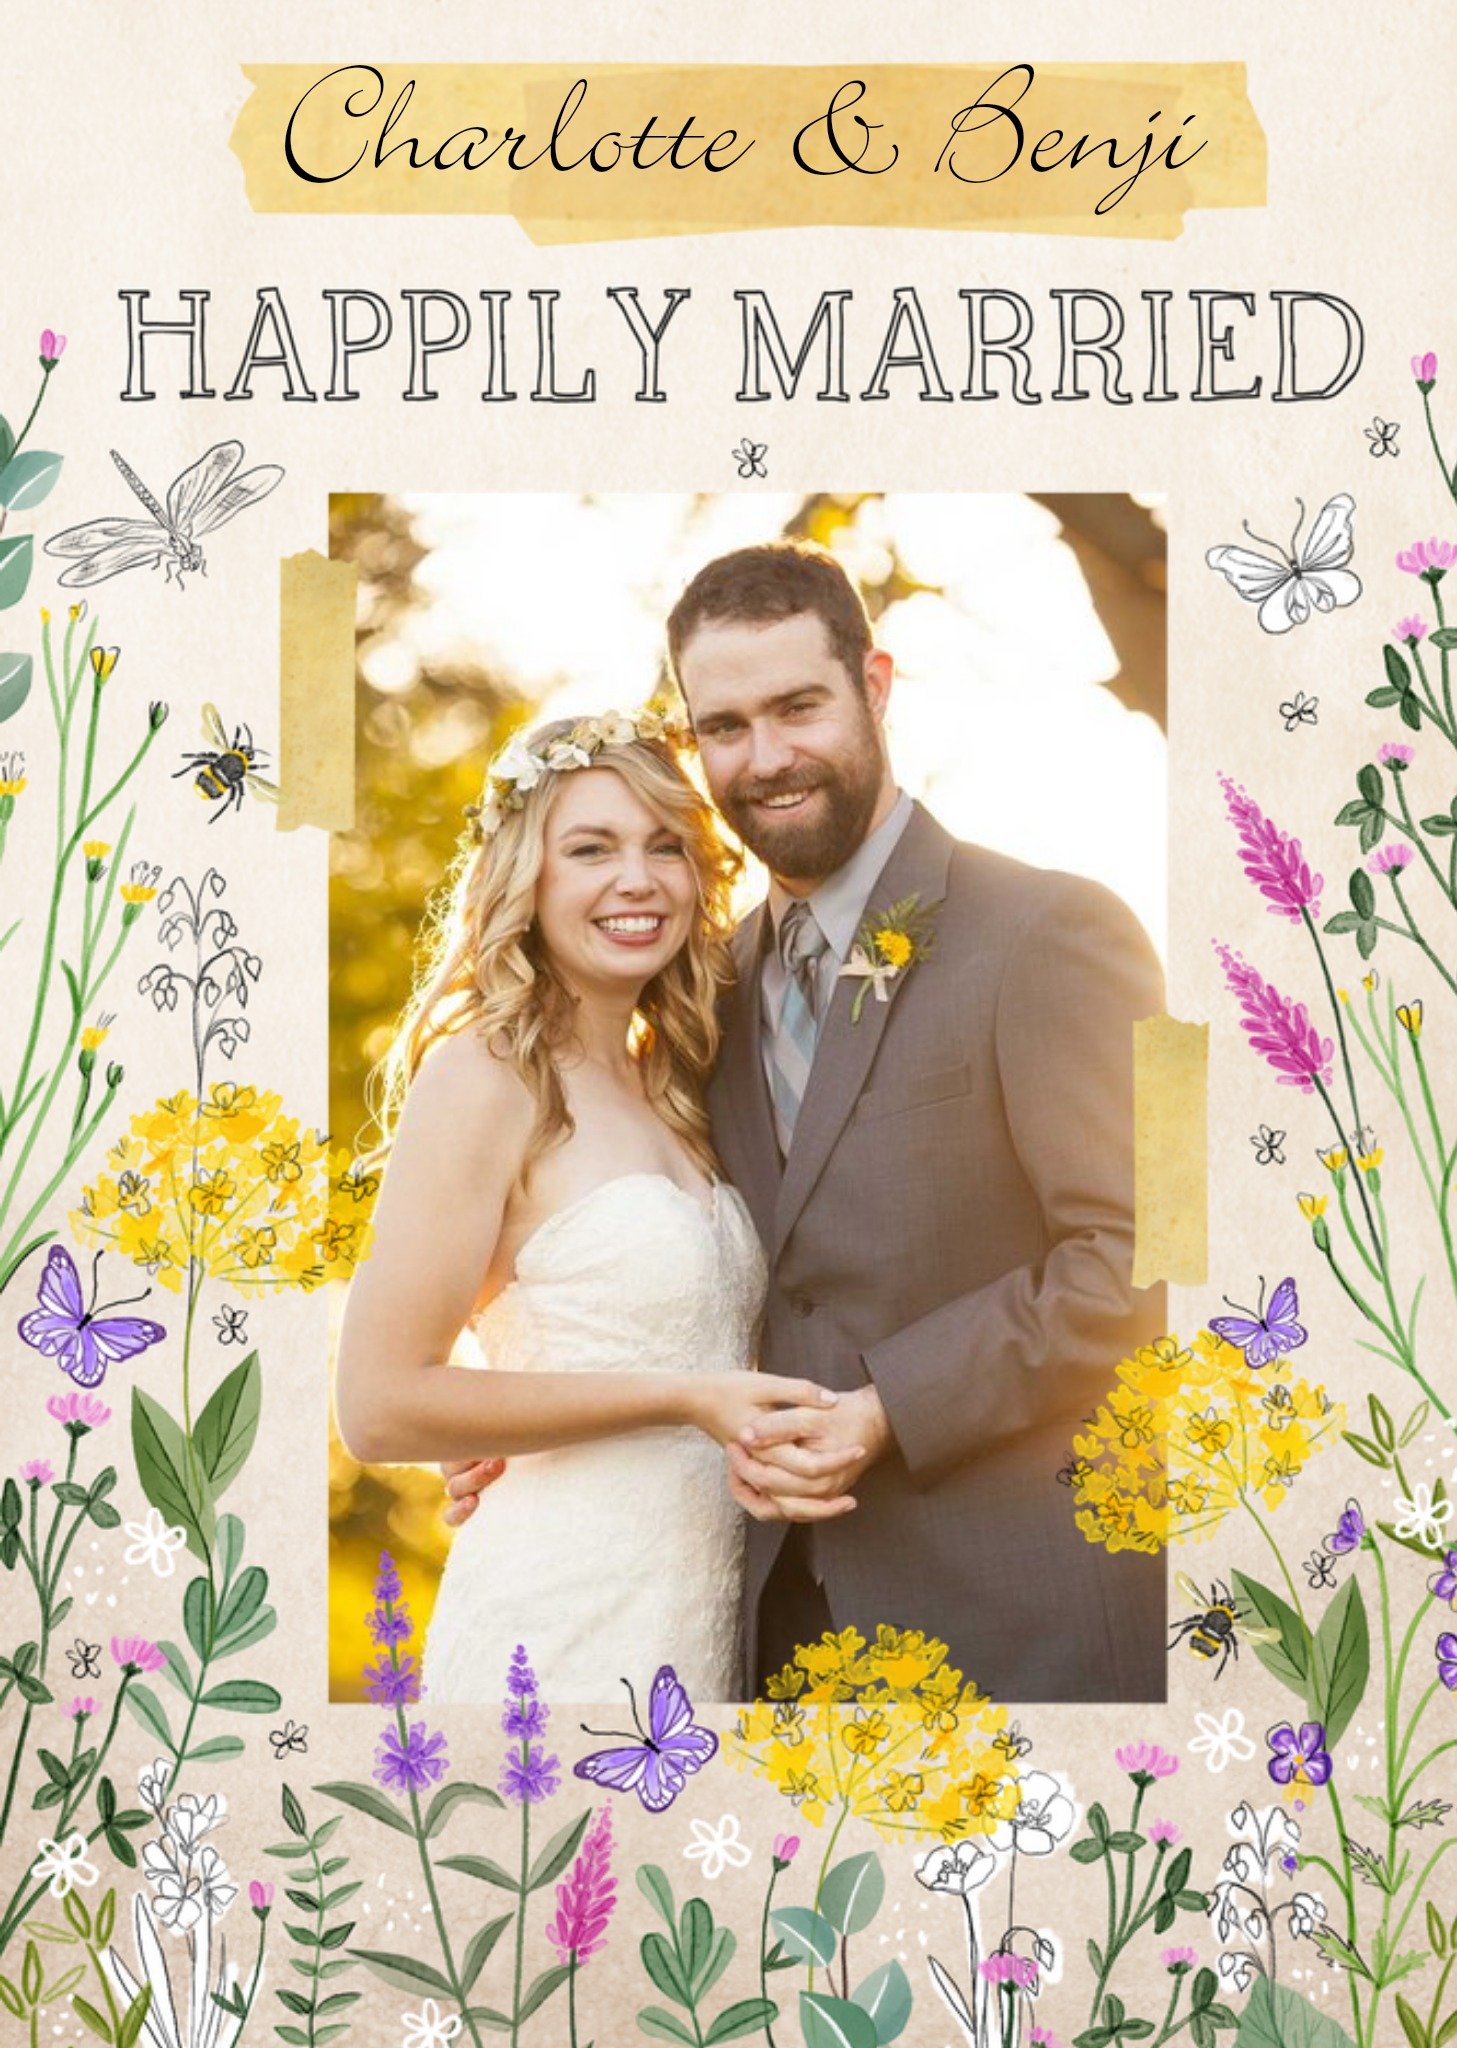 Okey Dokey Design Illustration Of Flowers And Butterflies Happily Married Photo Upload Wedding Card 